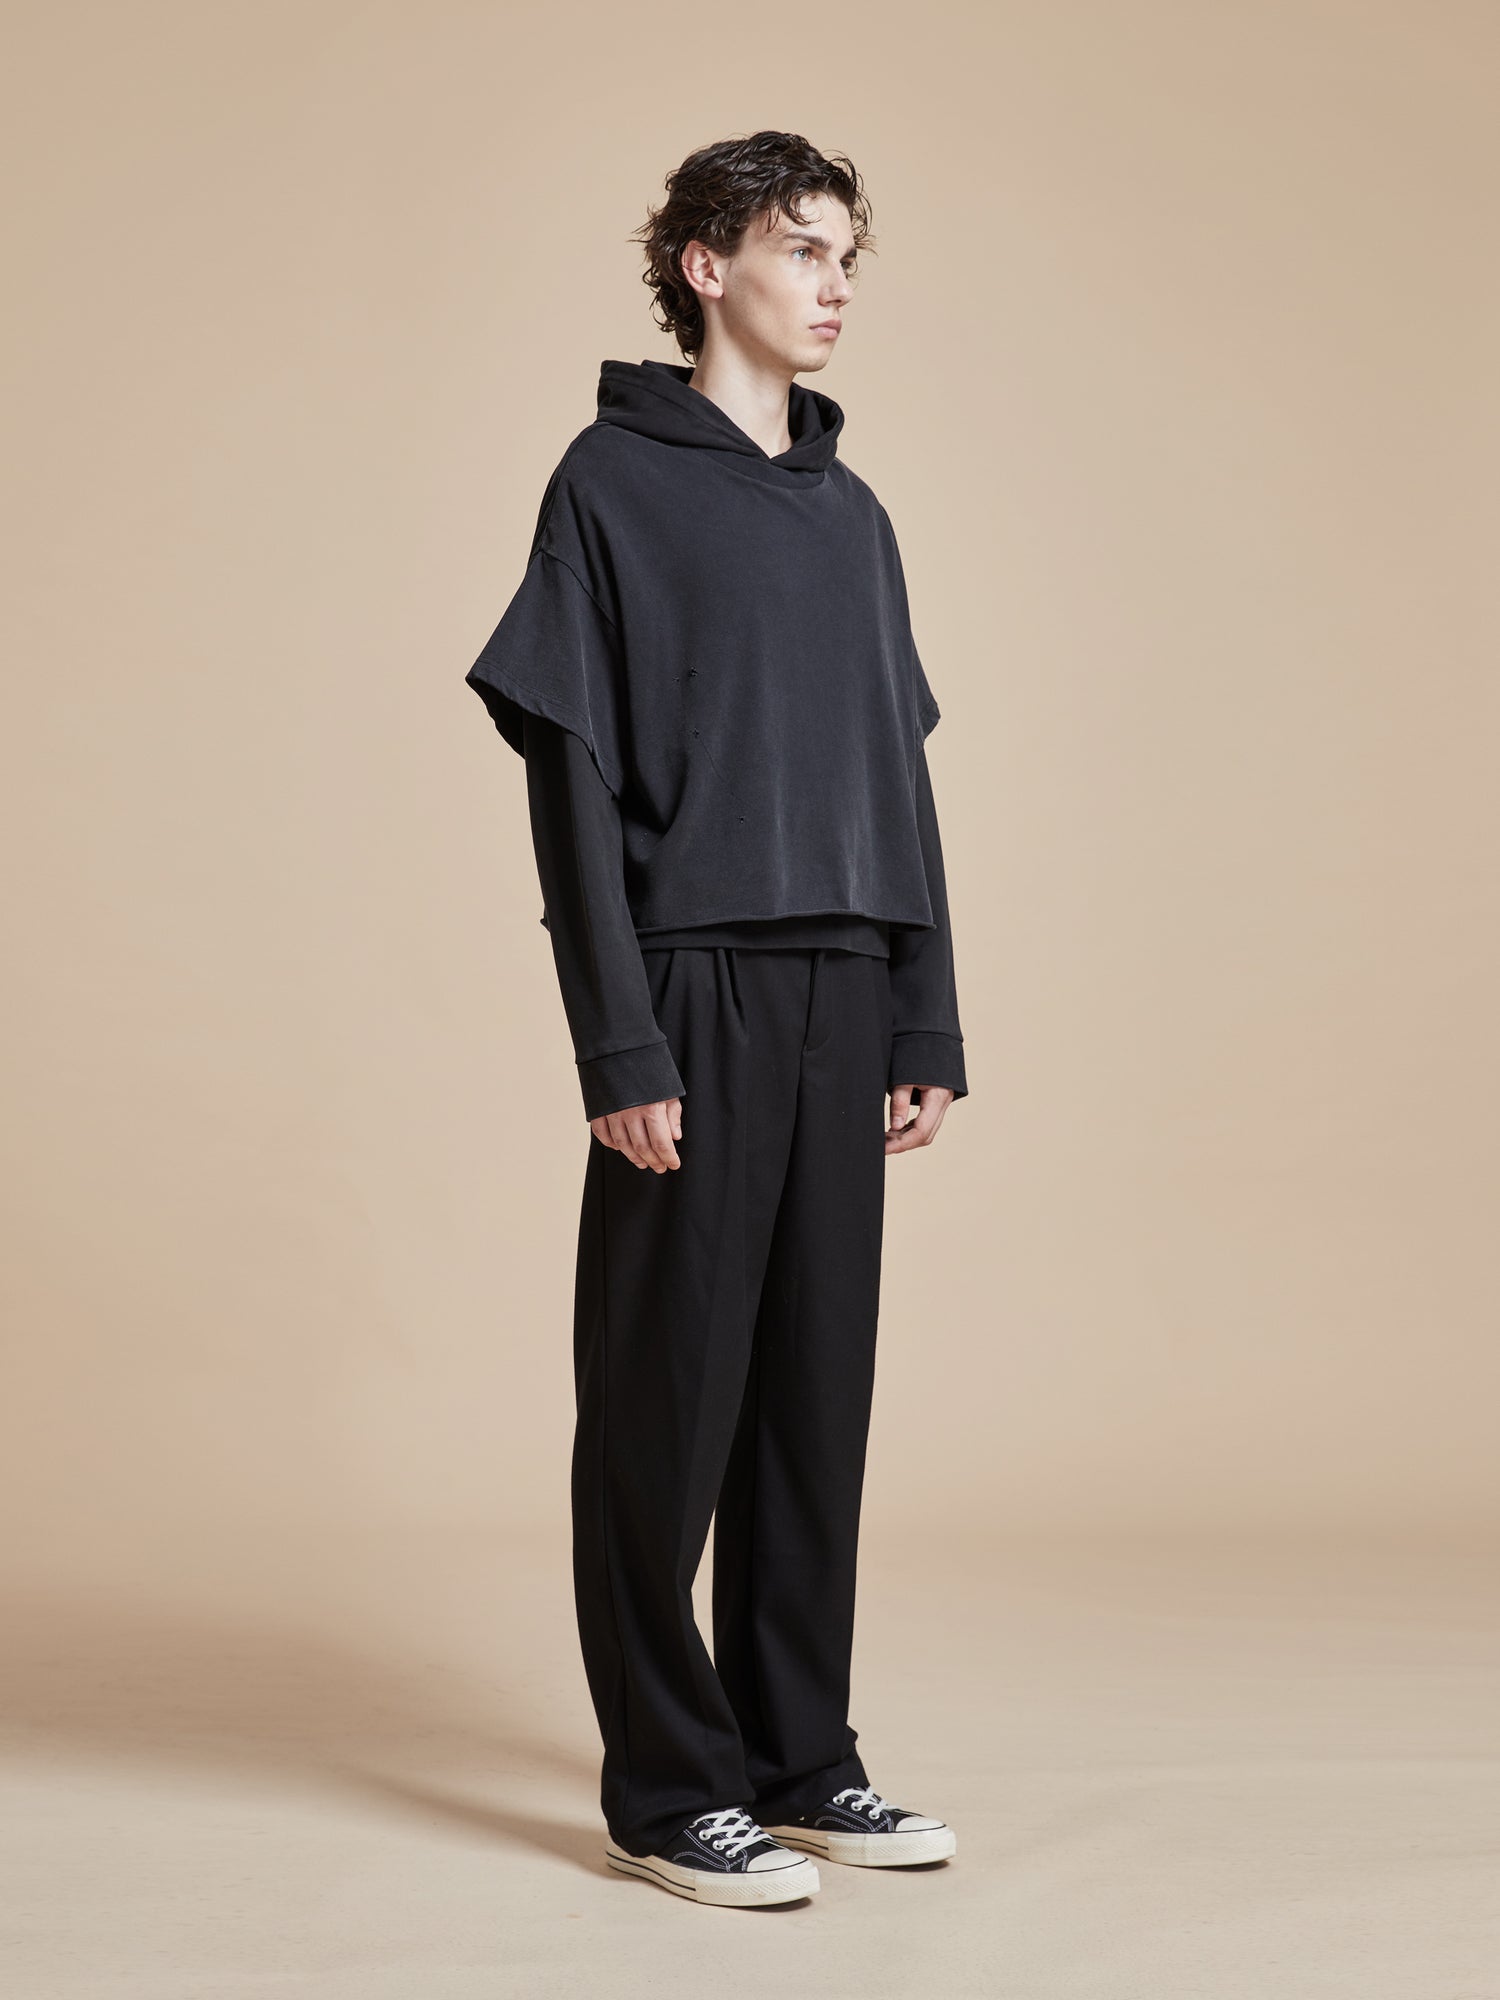 The model is wearing a Found double layer hoodie and black pants.